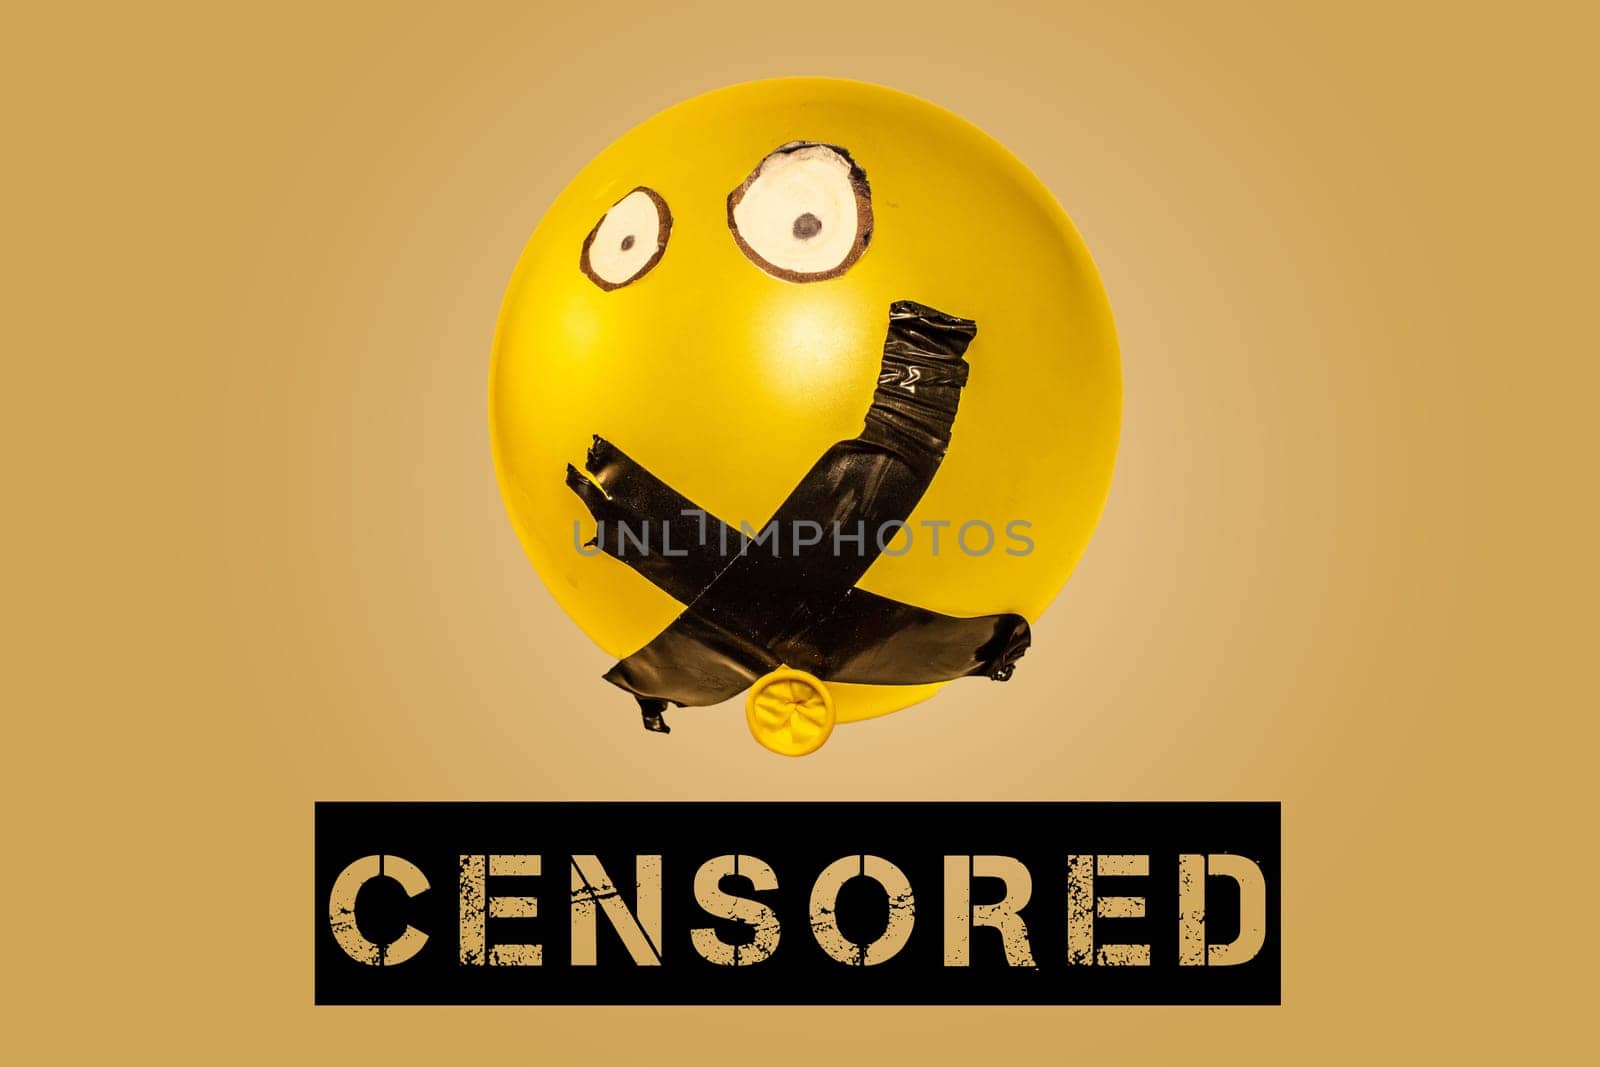 Illuminate the stifling effects of censorship and cancel culture with this evocative concept image portraying a balloon with its mouth sealed shut by tape.